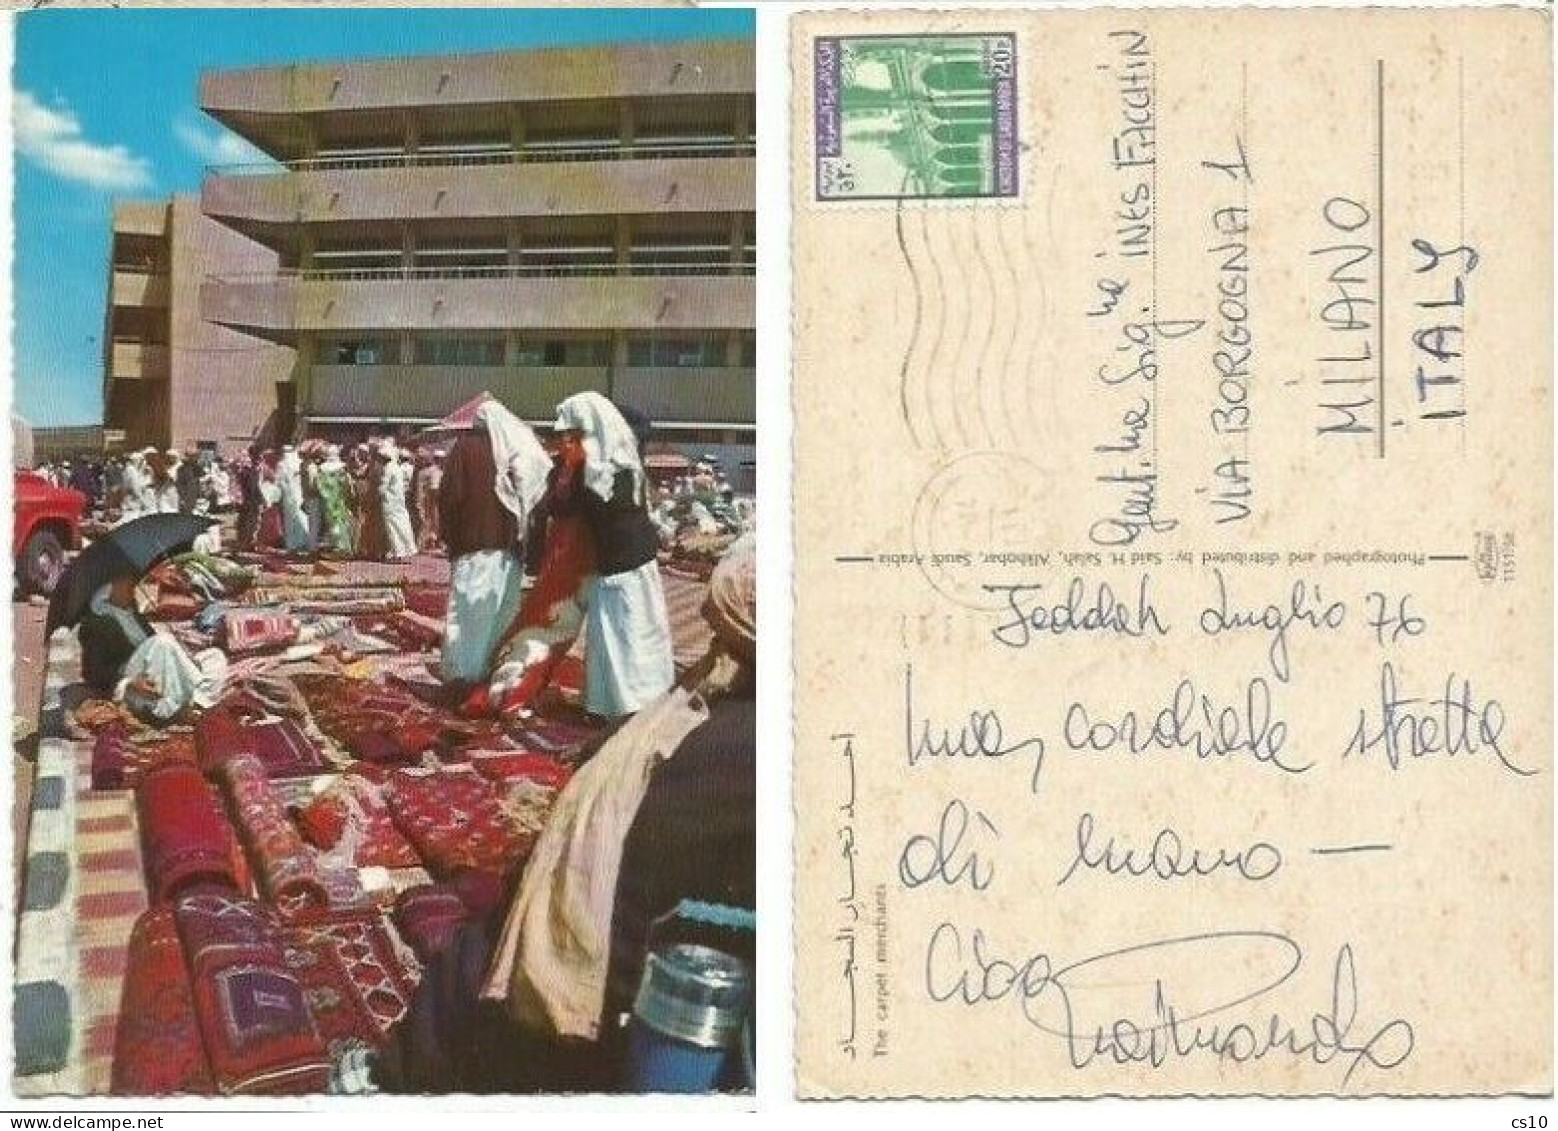 Saudi Arabia The Carpet Merchants - Pcard Jeddah July1976 X Italy With Regular Issue P.20 Solo Franking - Verkopers